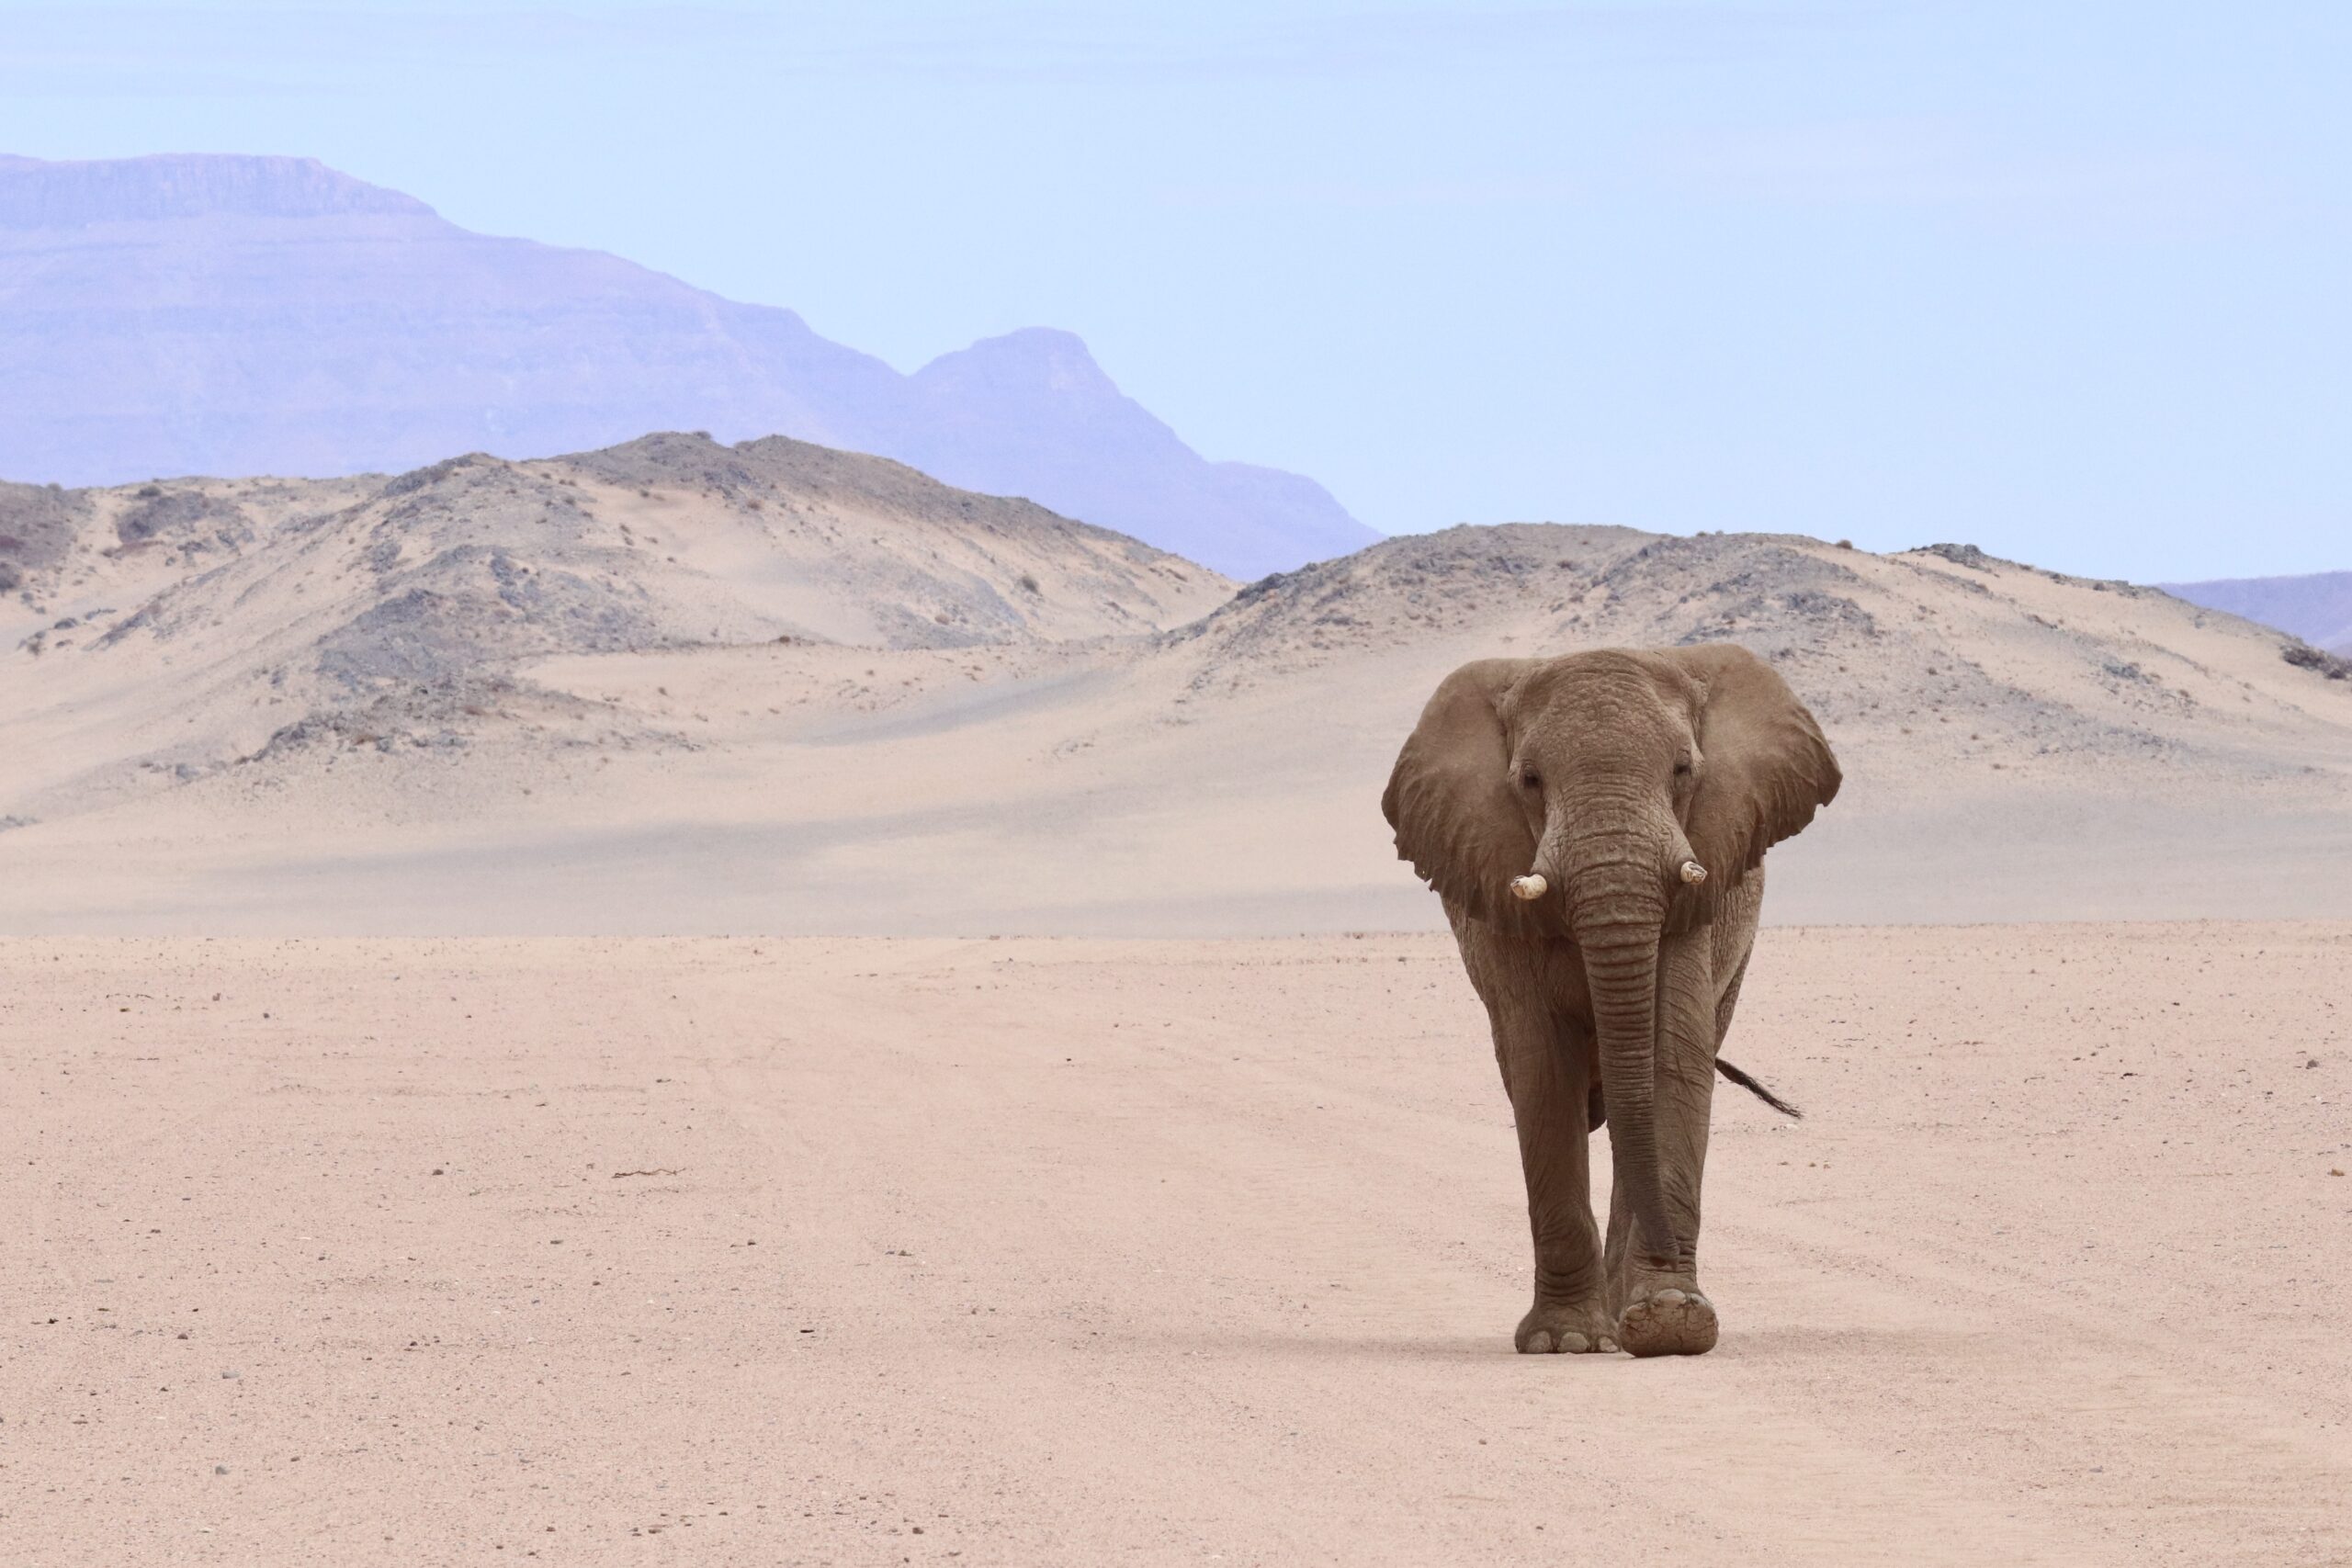 an elephant walking across a dirt road with mountains in the background.